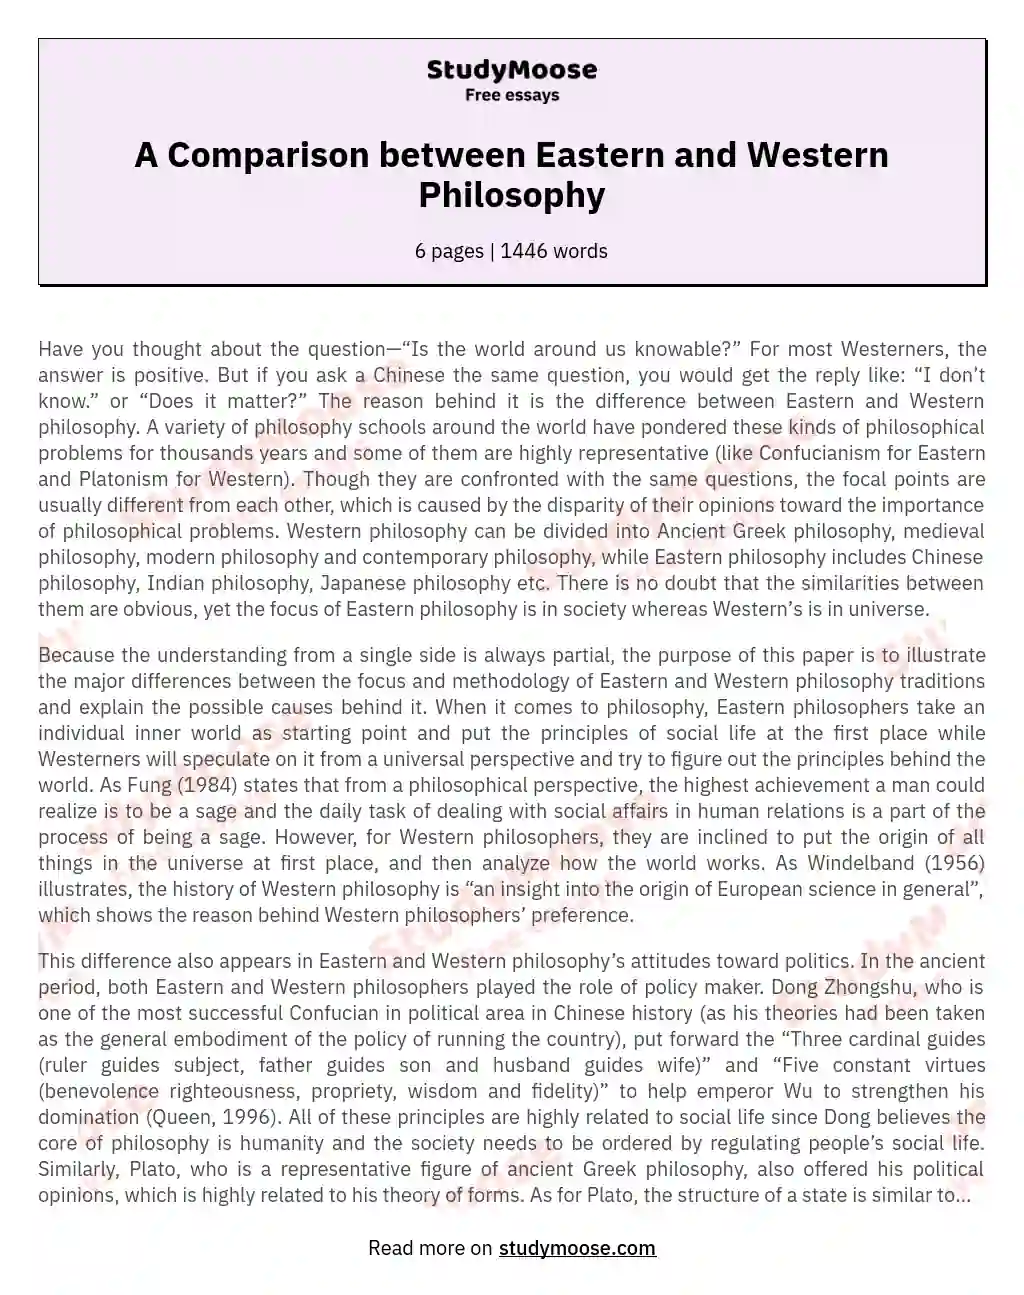 A Comparison between Eastern and Western Philosophy essay